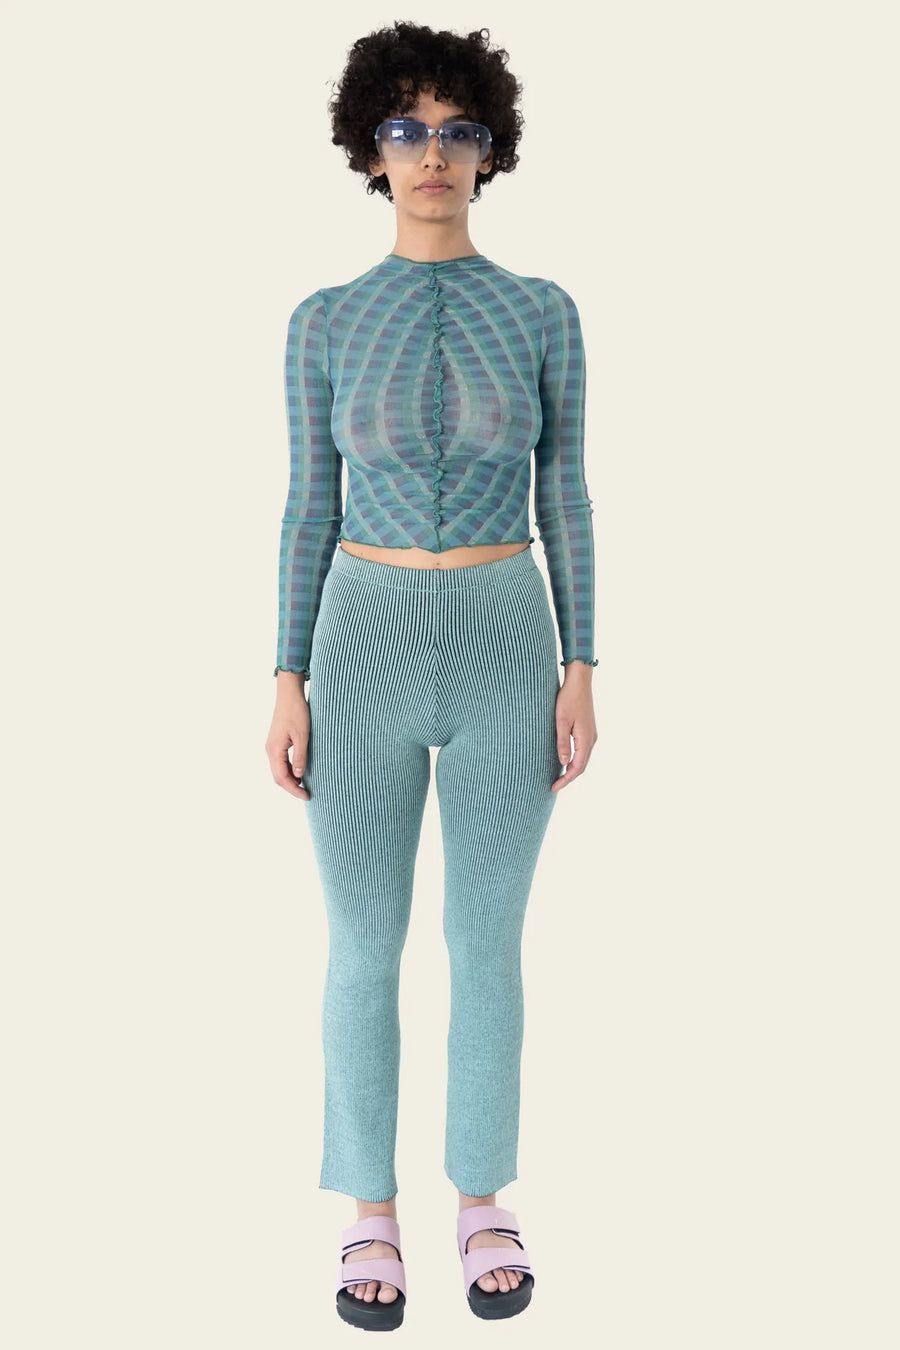 Find Me Now Marimba Pants in Blue Noise